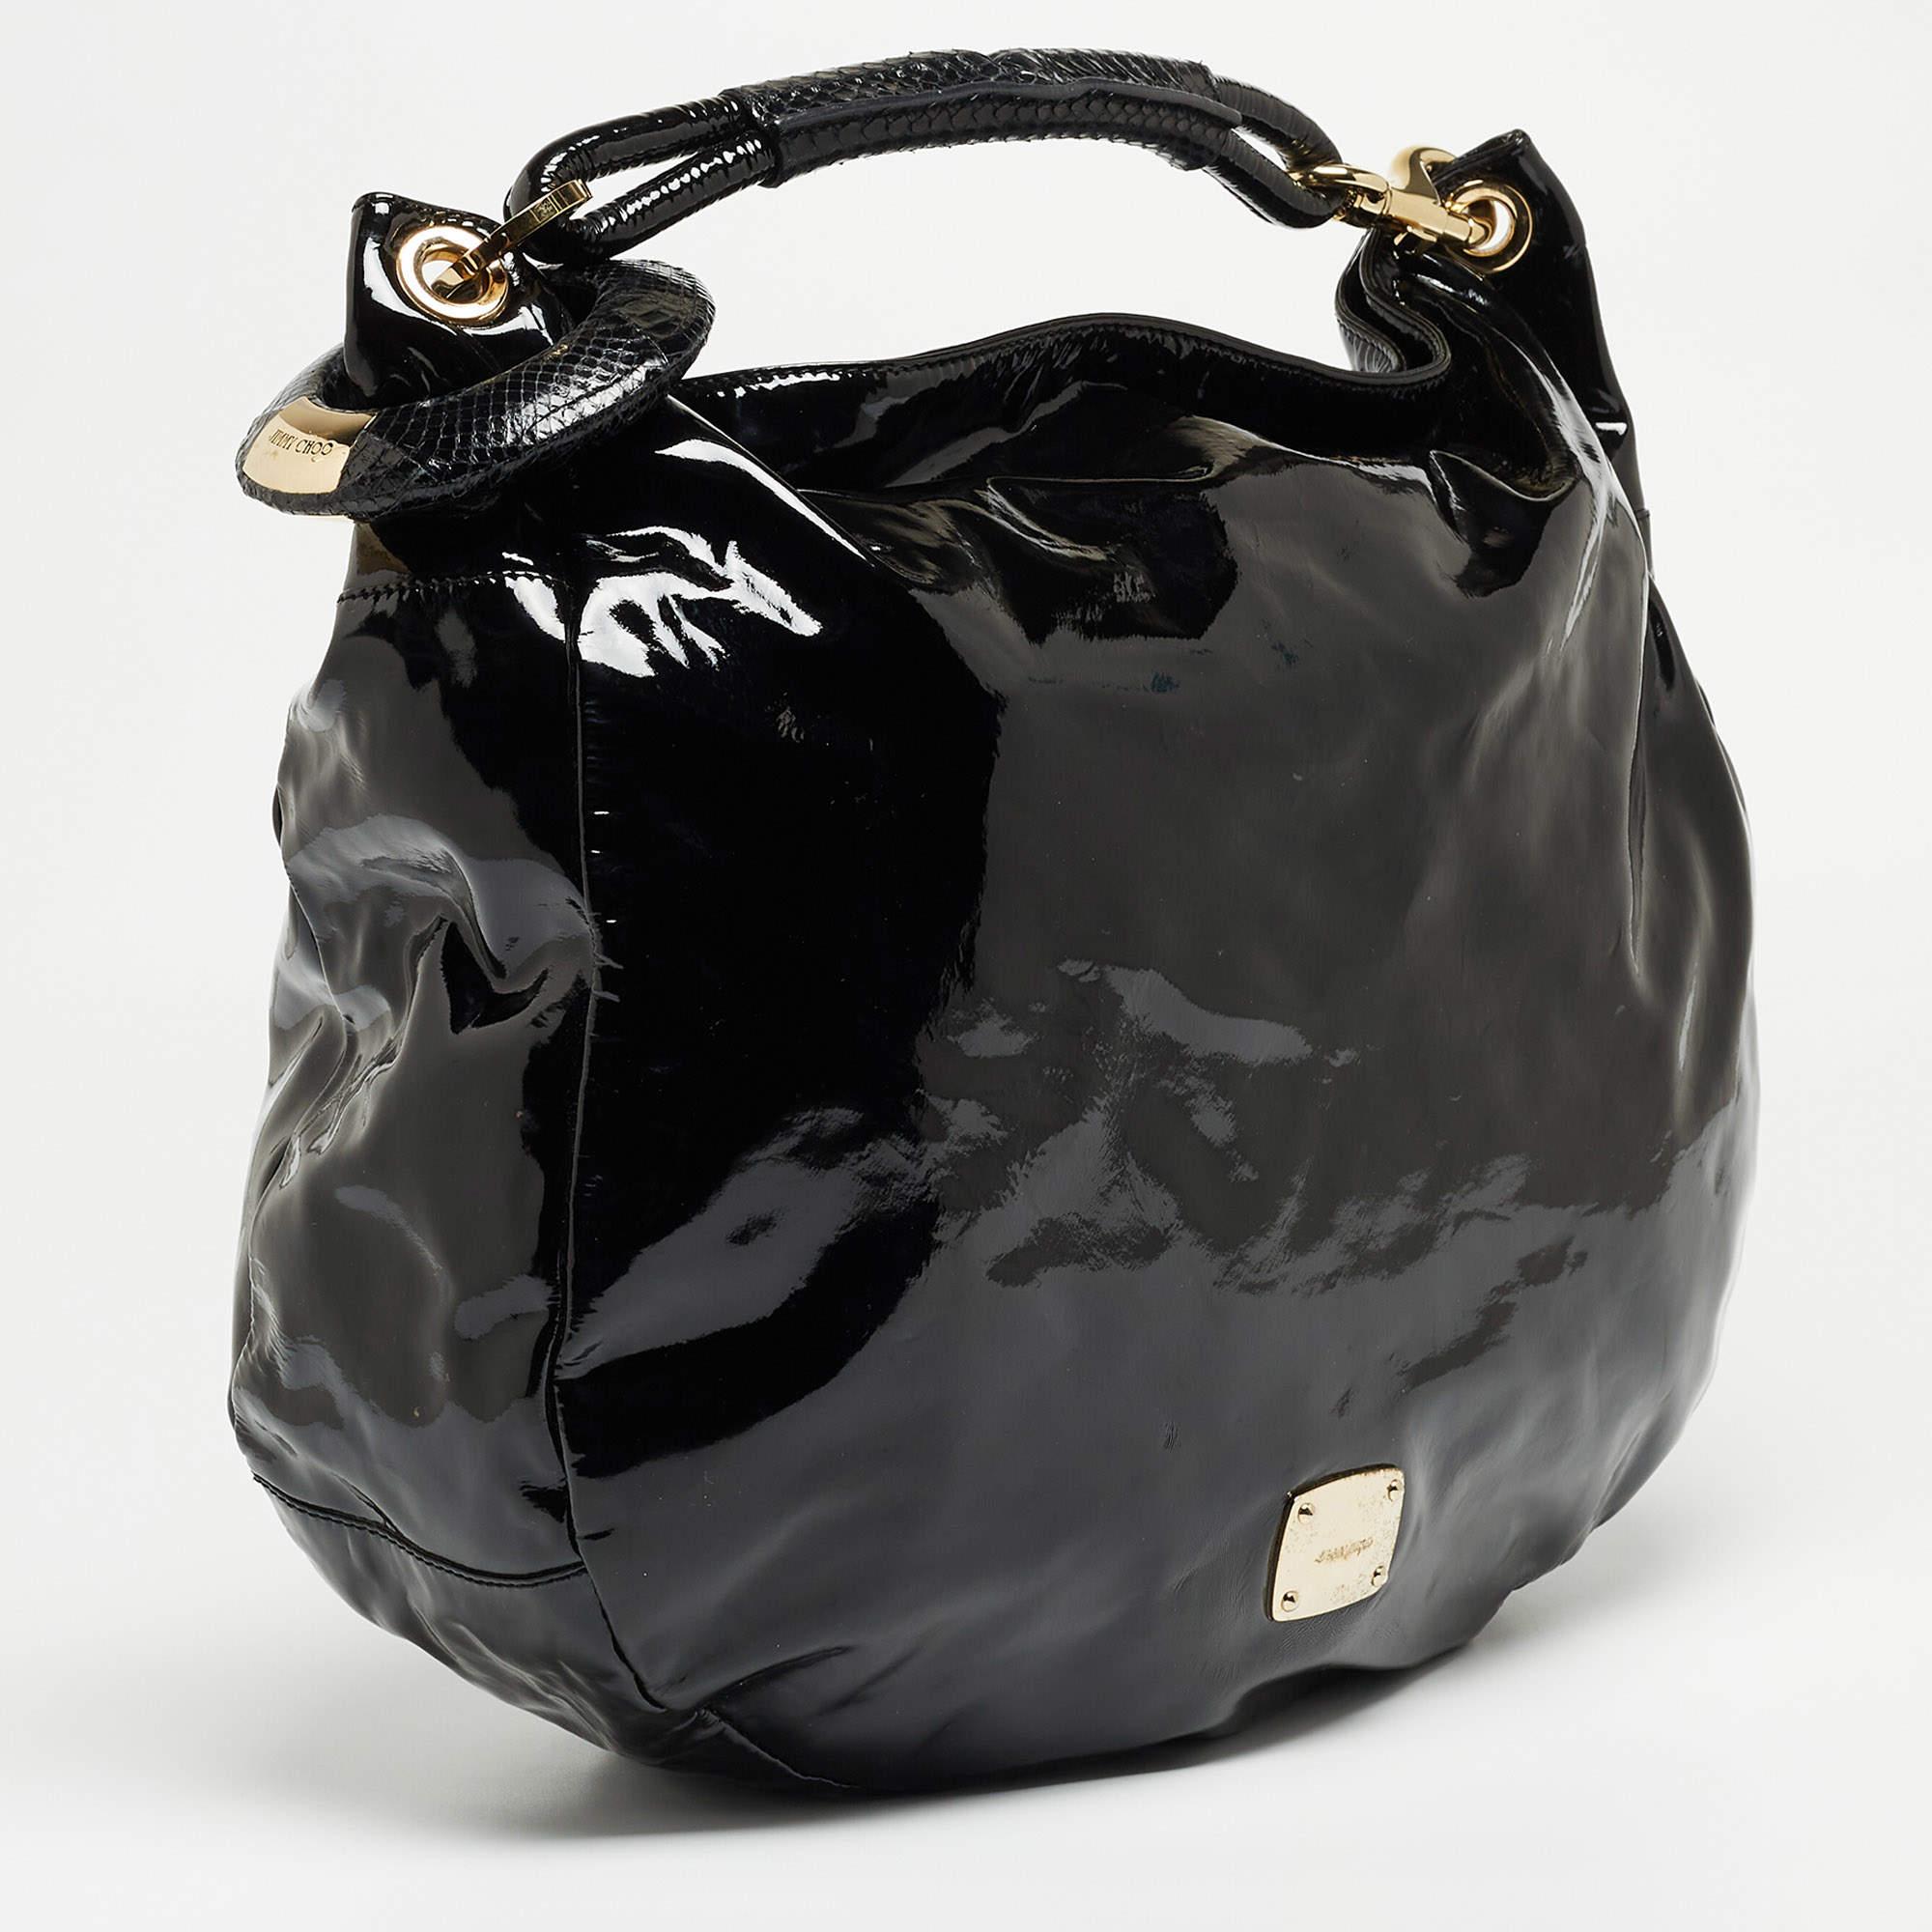 Stylish handbags never fail to make a fashionable impression. Make this designer hobo yours by pairing it with your sophisticated workwear as well as chic casual looks.


Includes
Original Dustbag, Authenticity Card